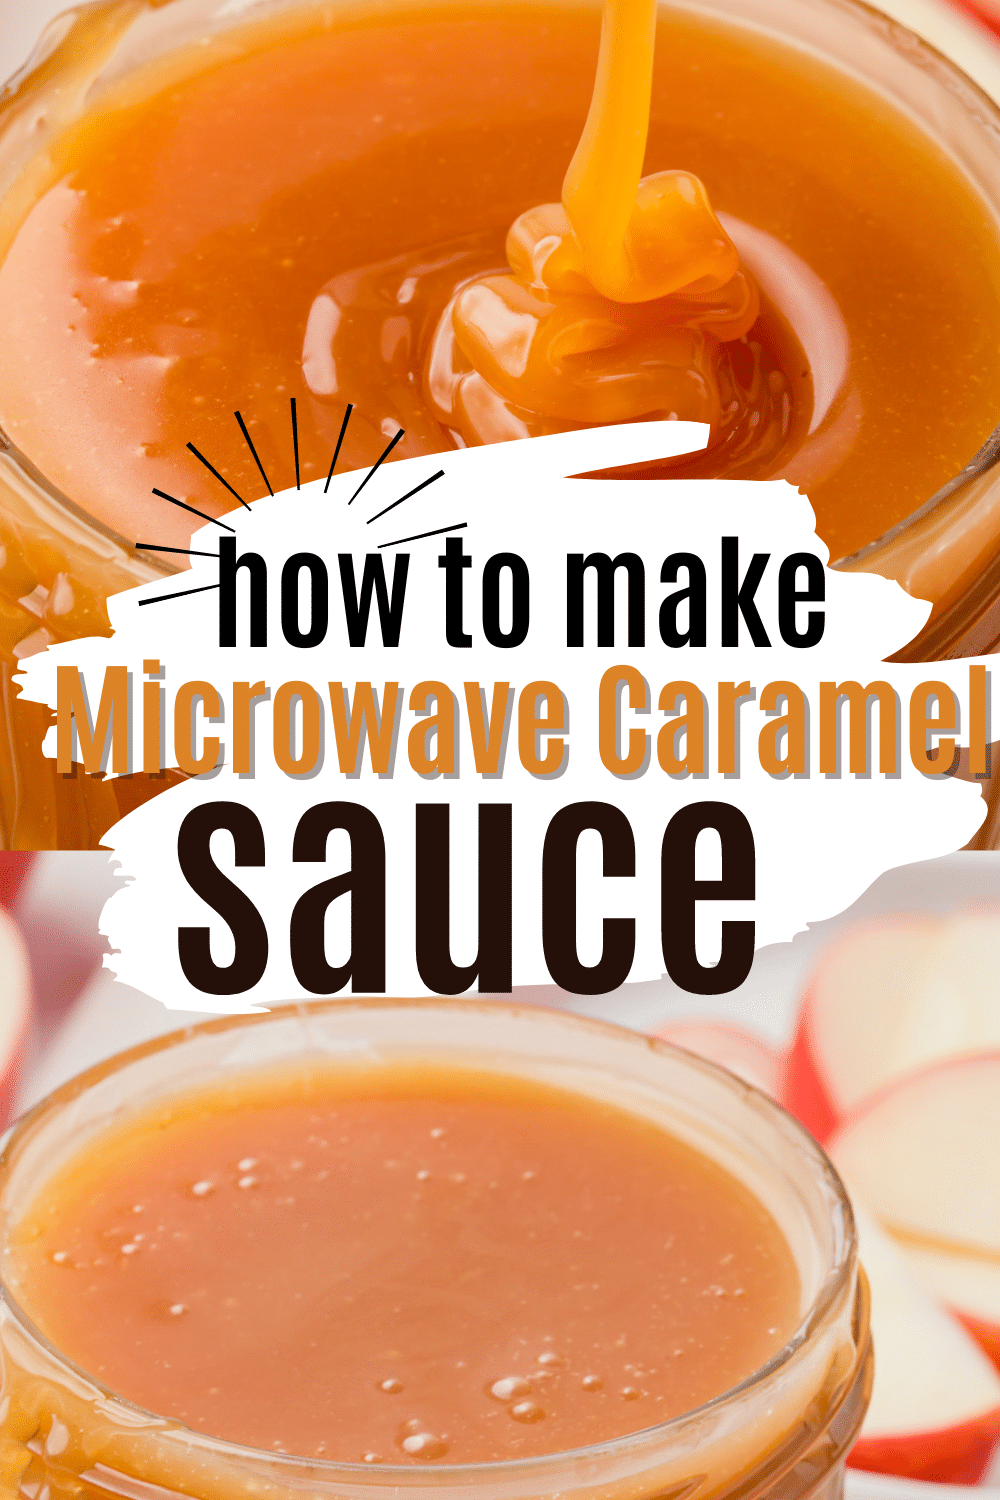 two photos of caramel. Text box in center says "how to make microwave caramel sauce"